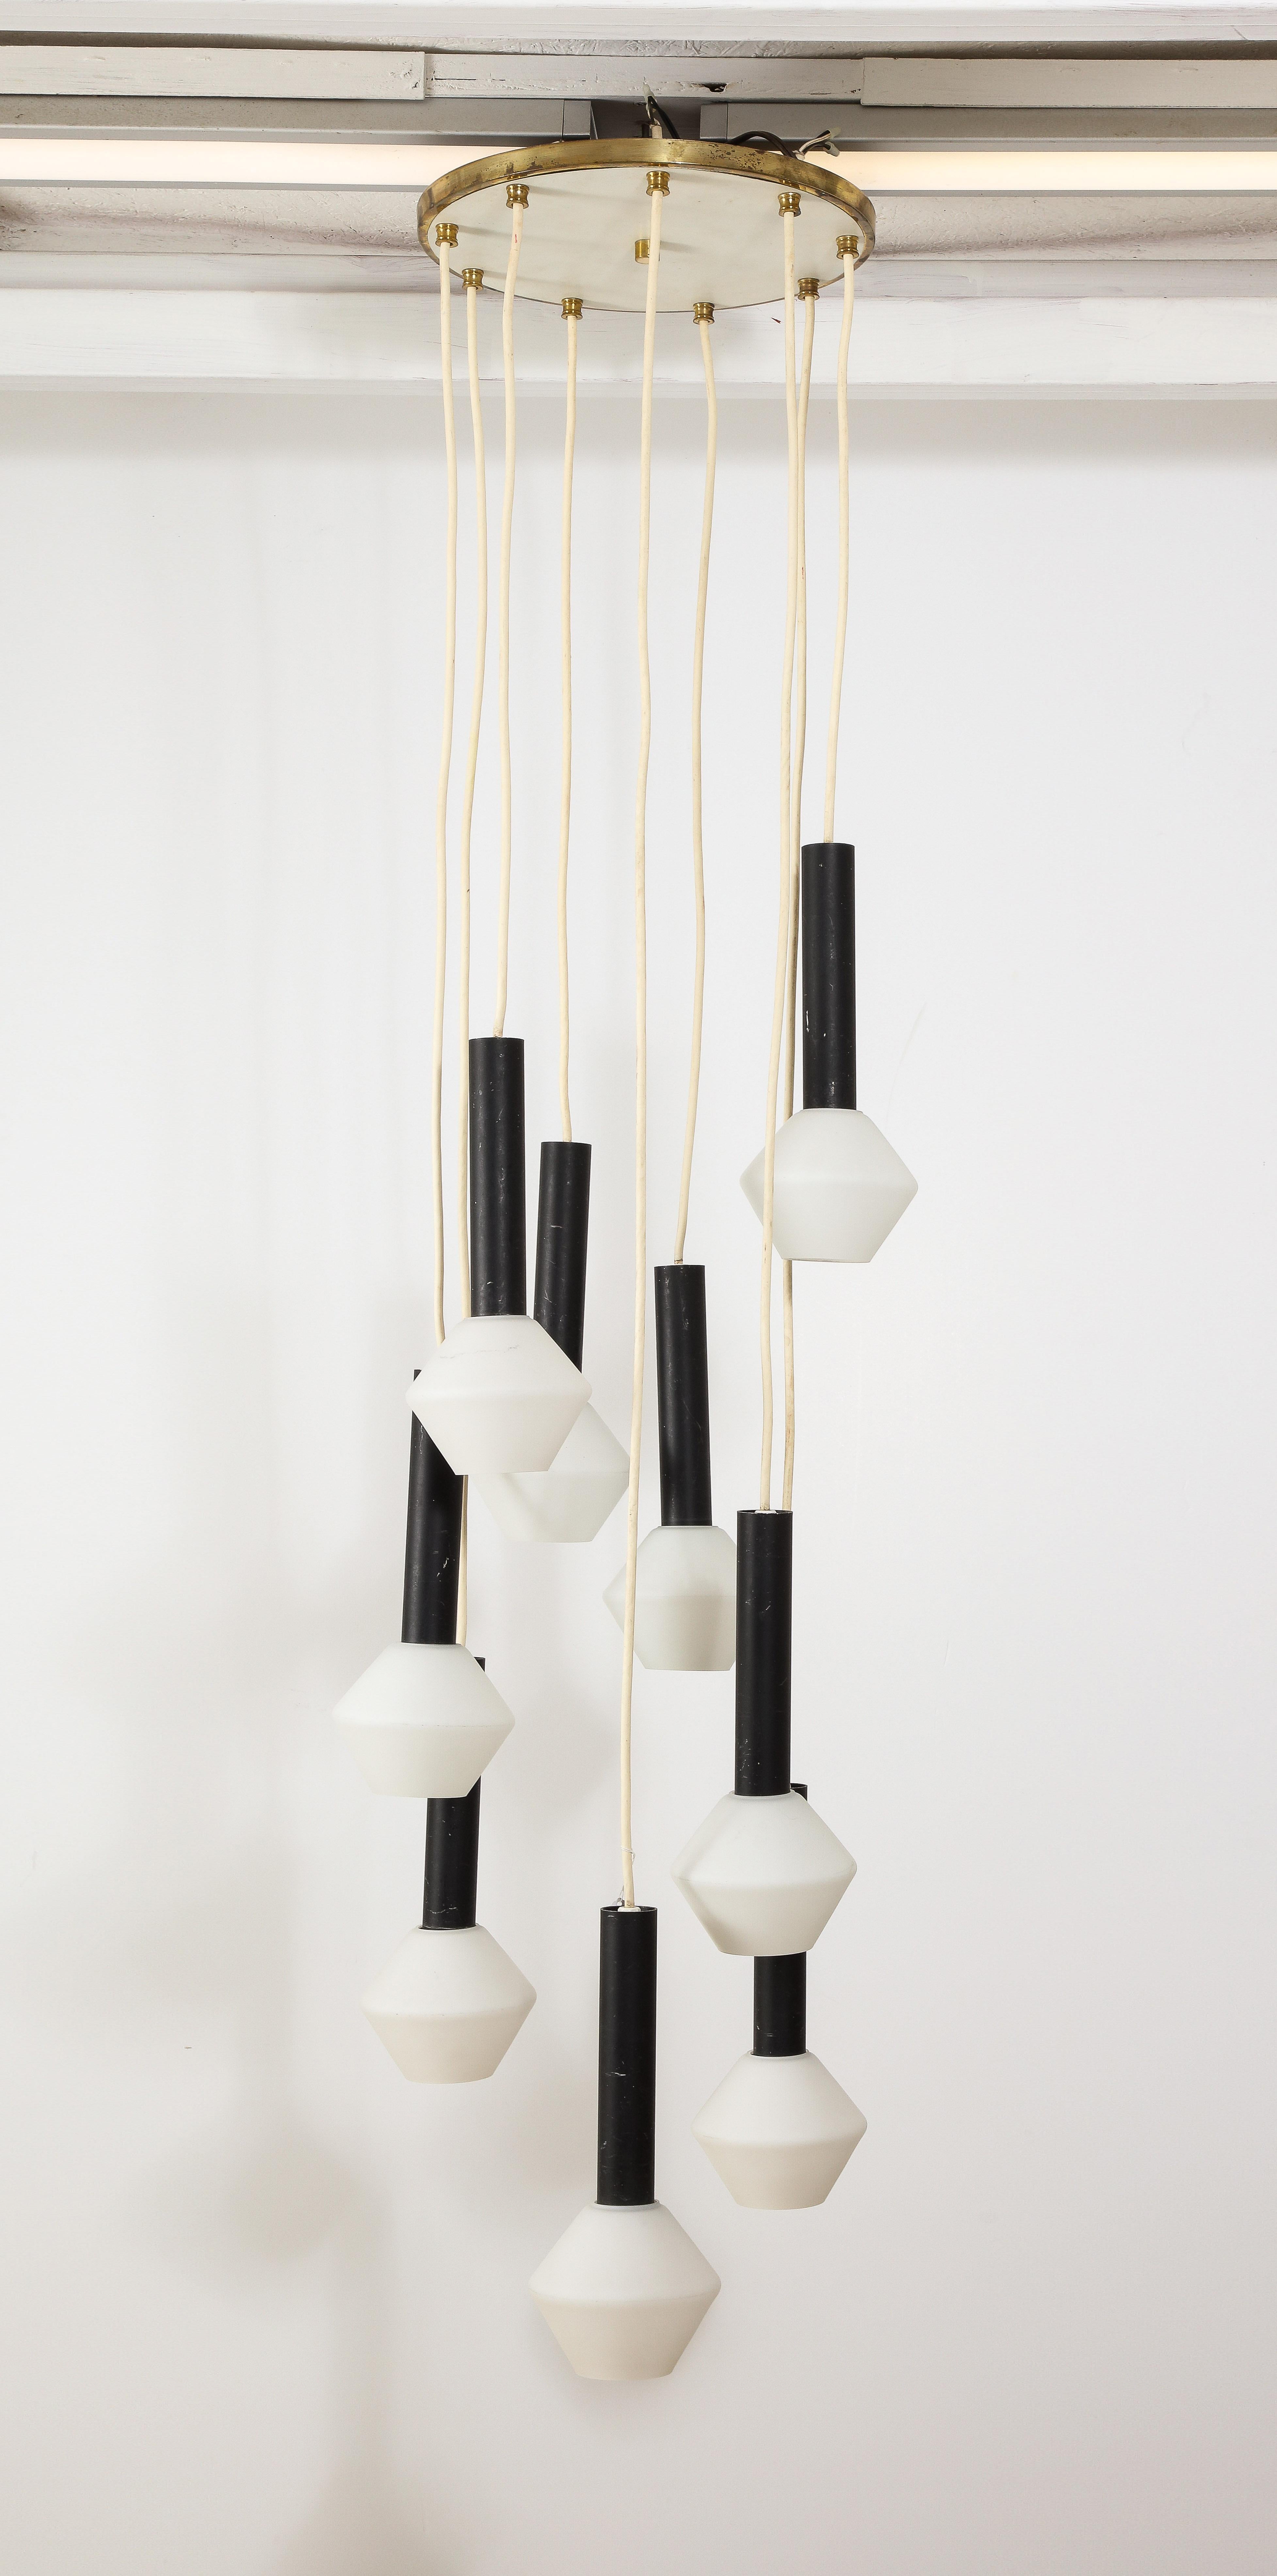 Large pendant fixture in enameled steel and brass, original “toupie” opaline shades. The drop can be adjusted by shortening or lengthening the wires.
